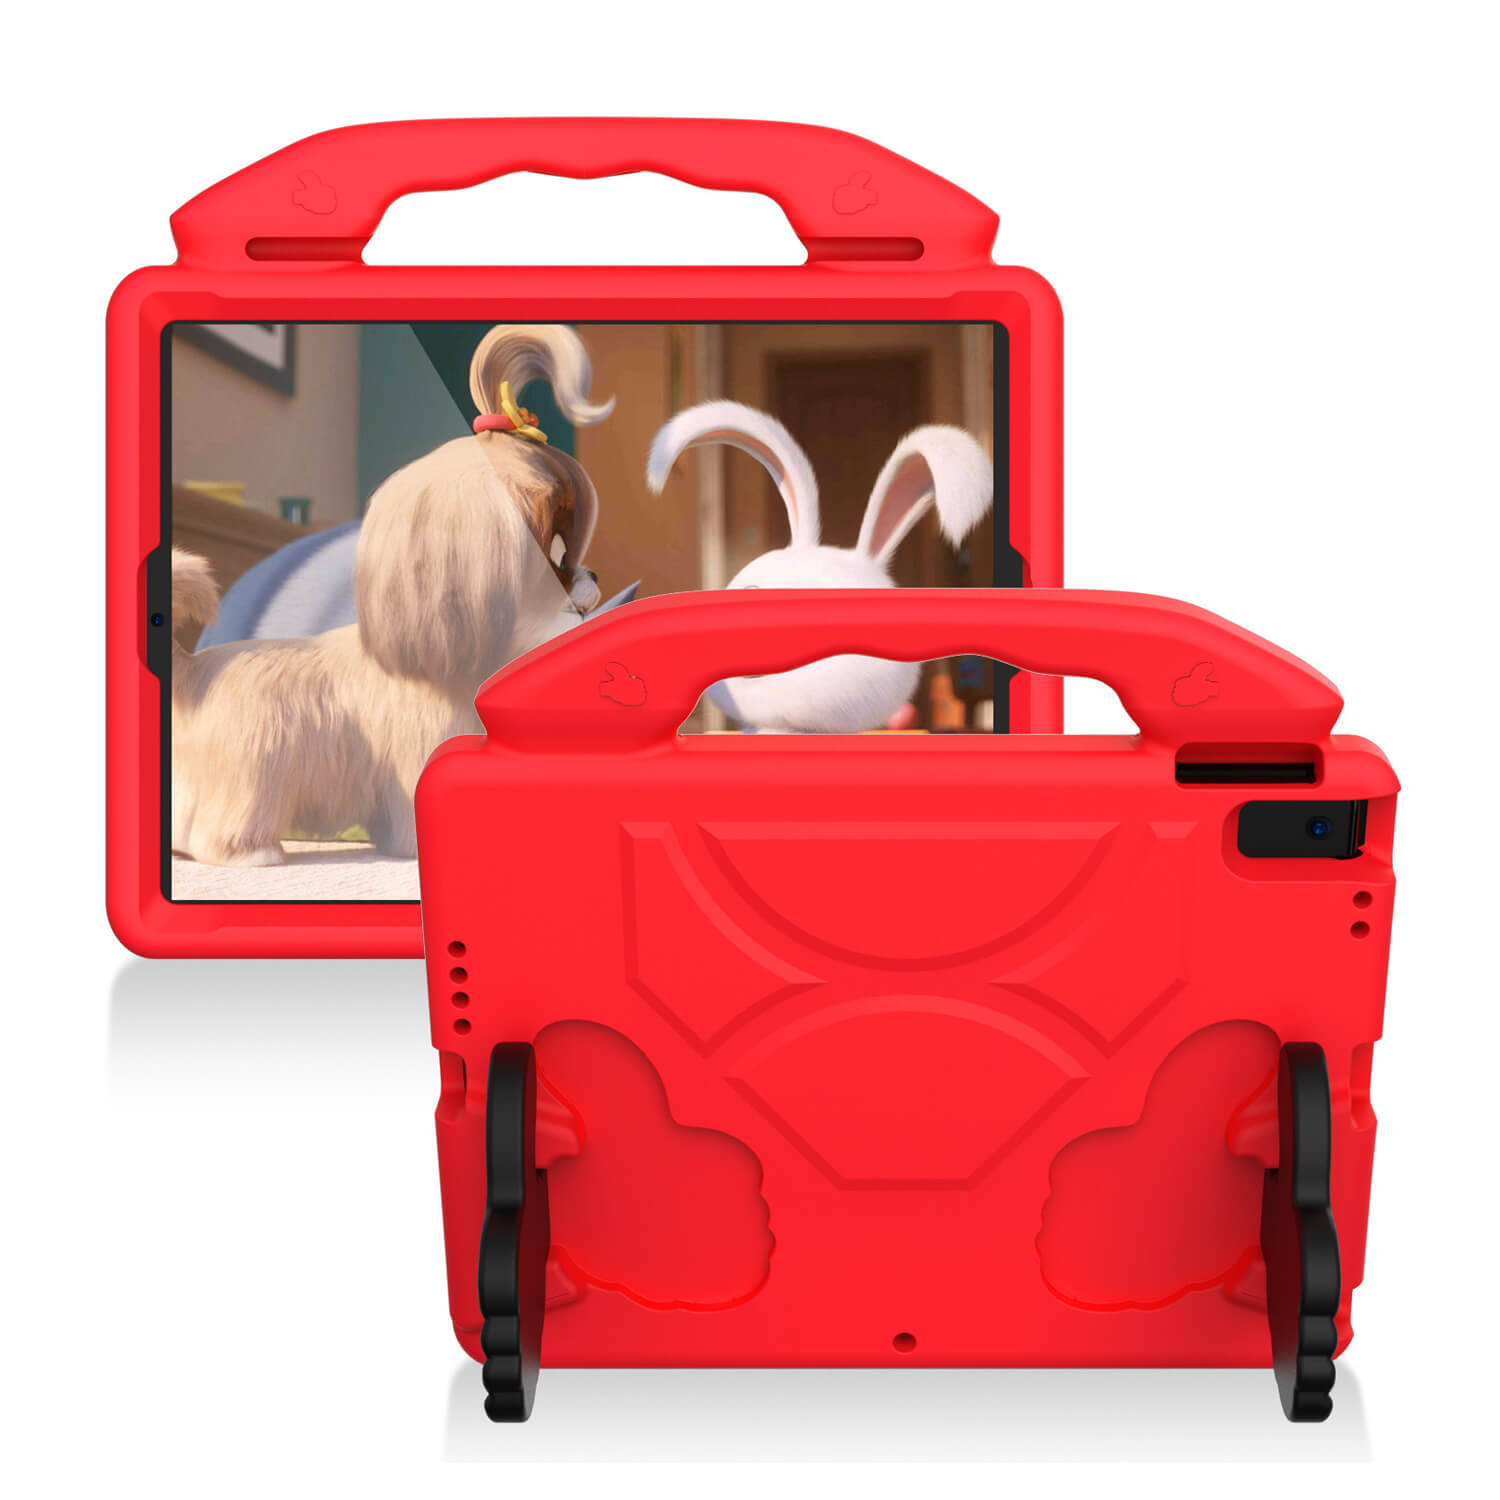 Tough On iPad Air 3 / Pro 2 10.5" Case EVA Kids Protection Red